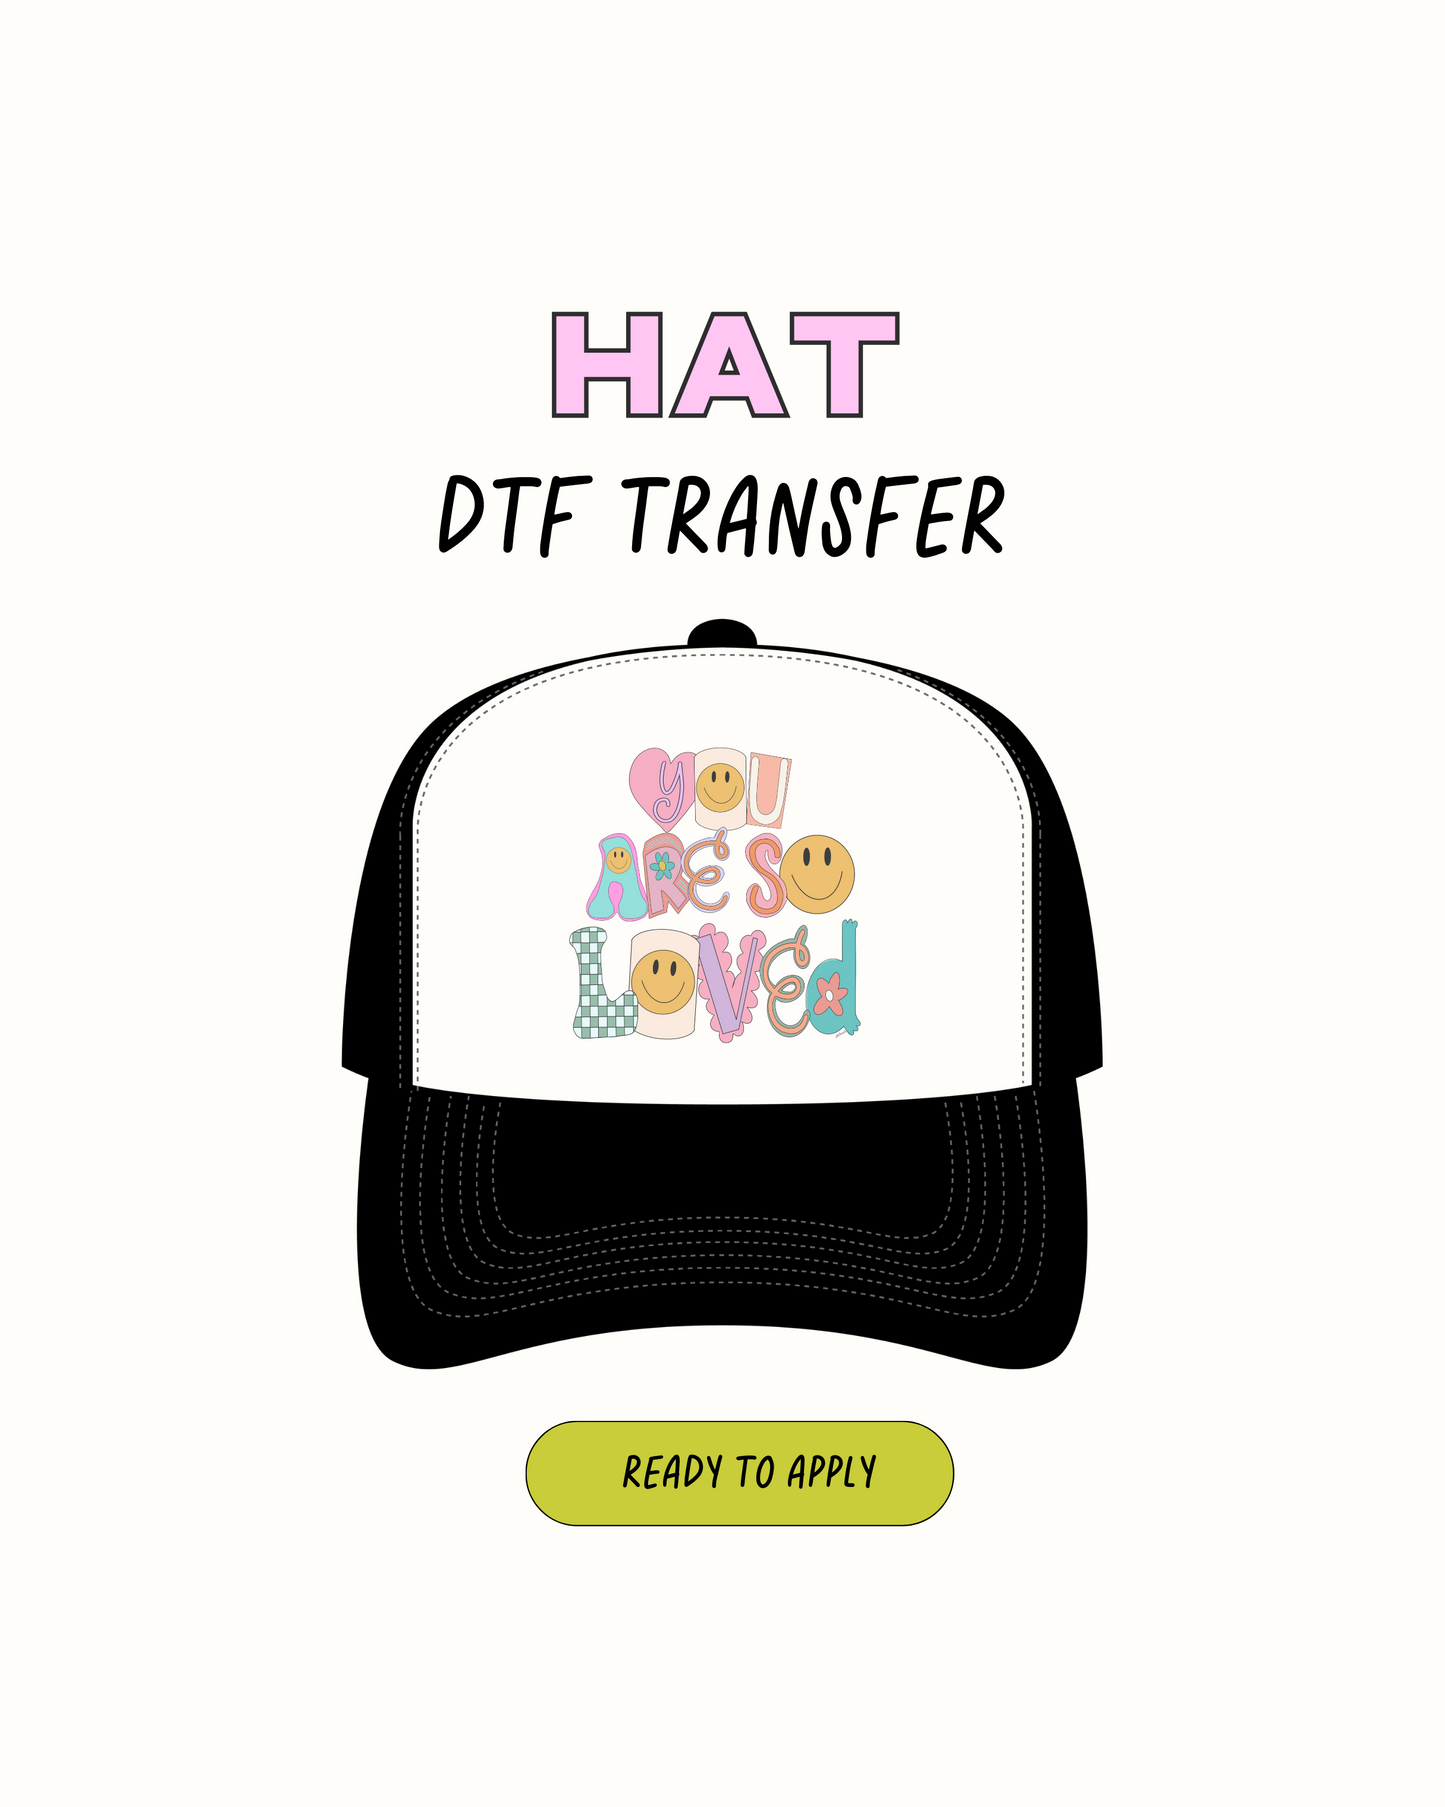 You are so loved - DTF Hat Transfers